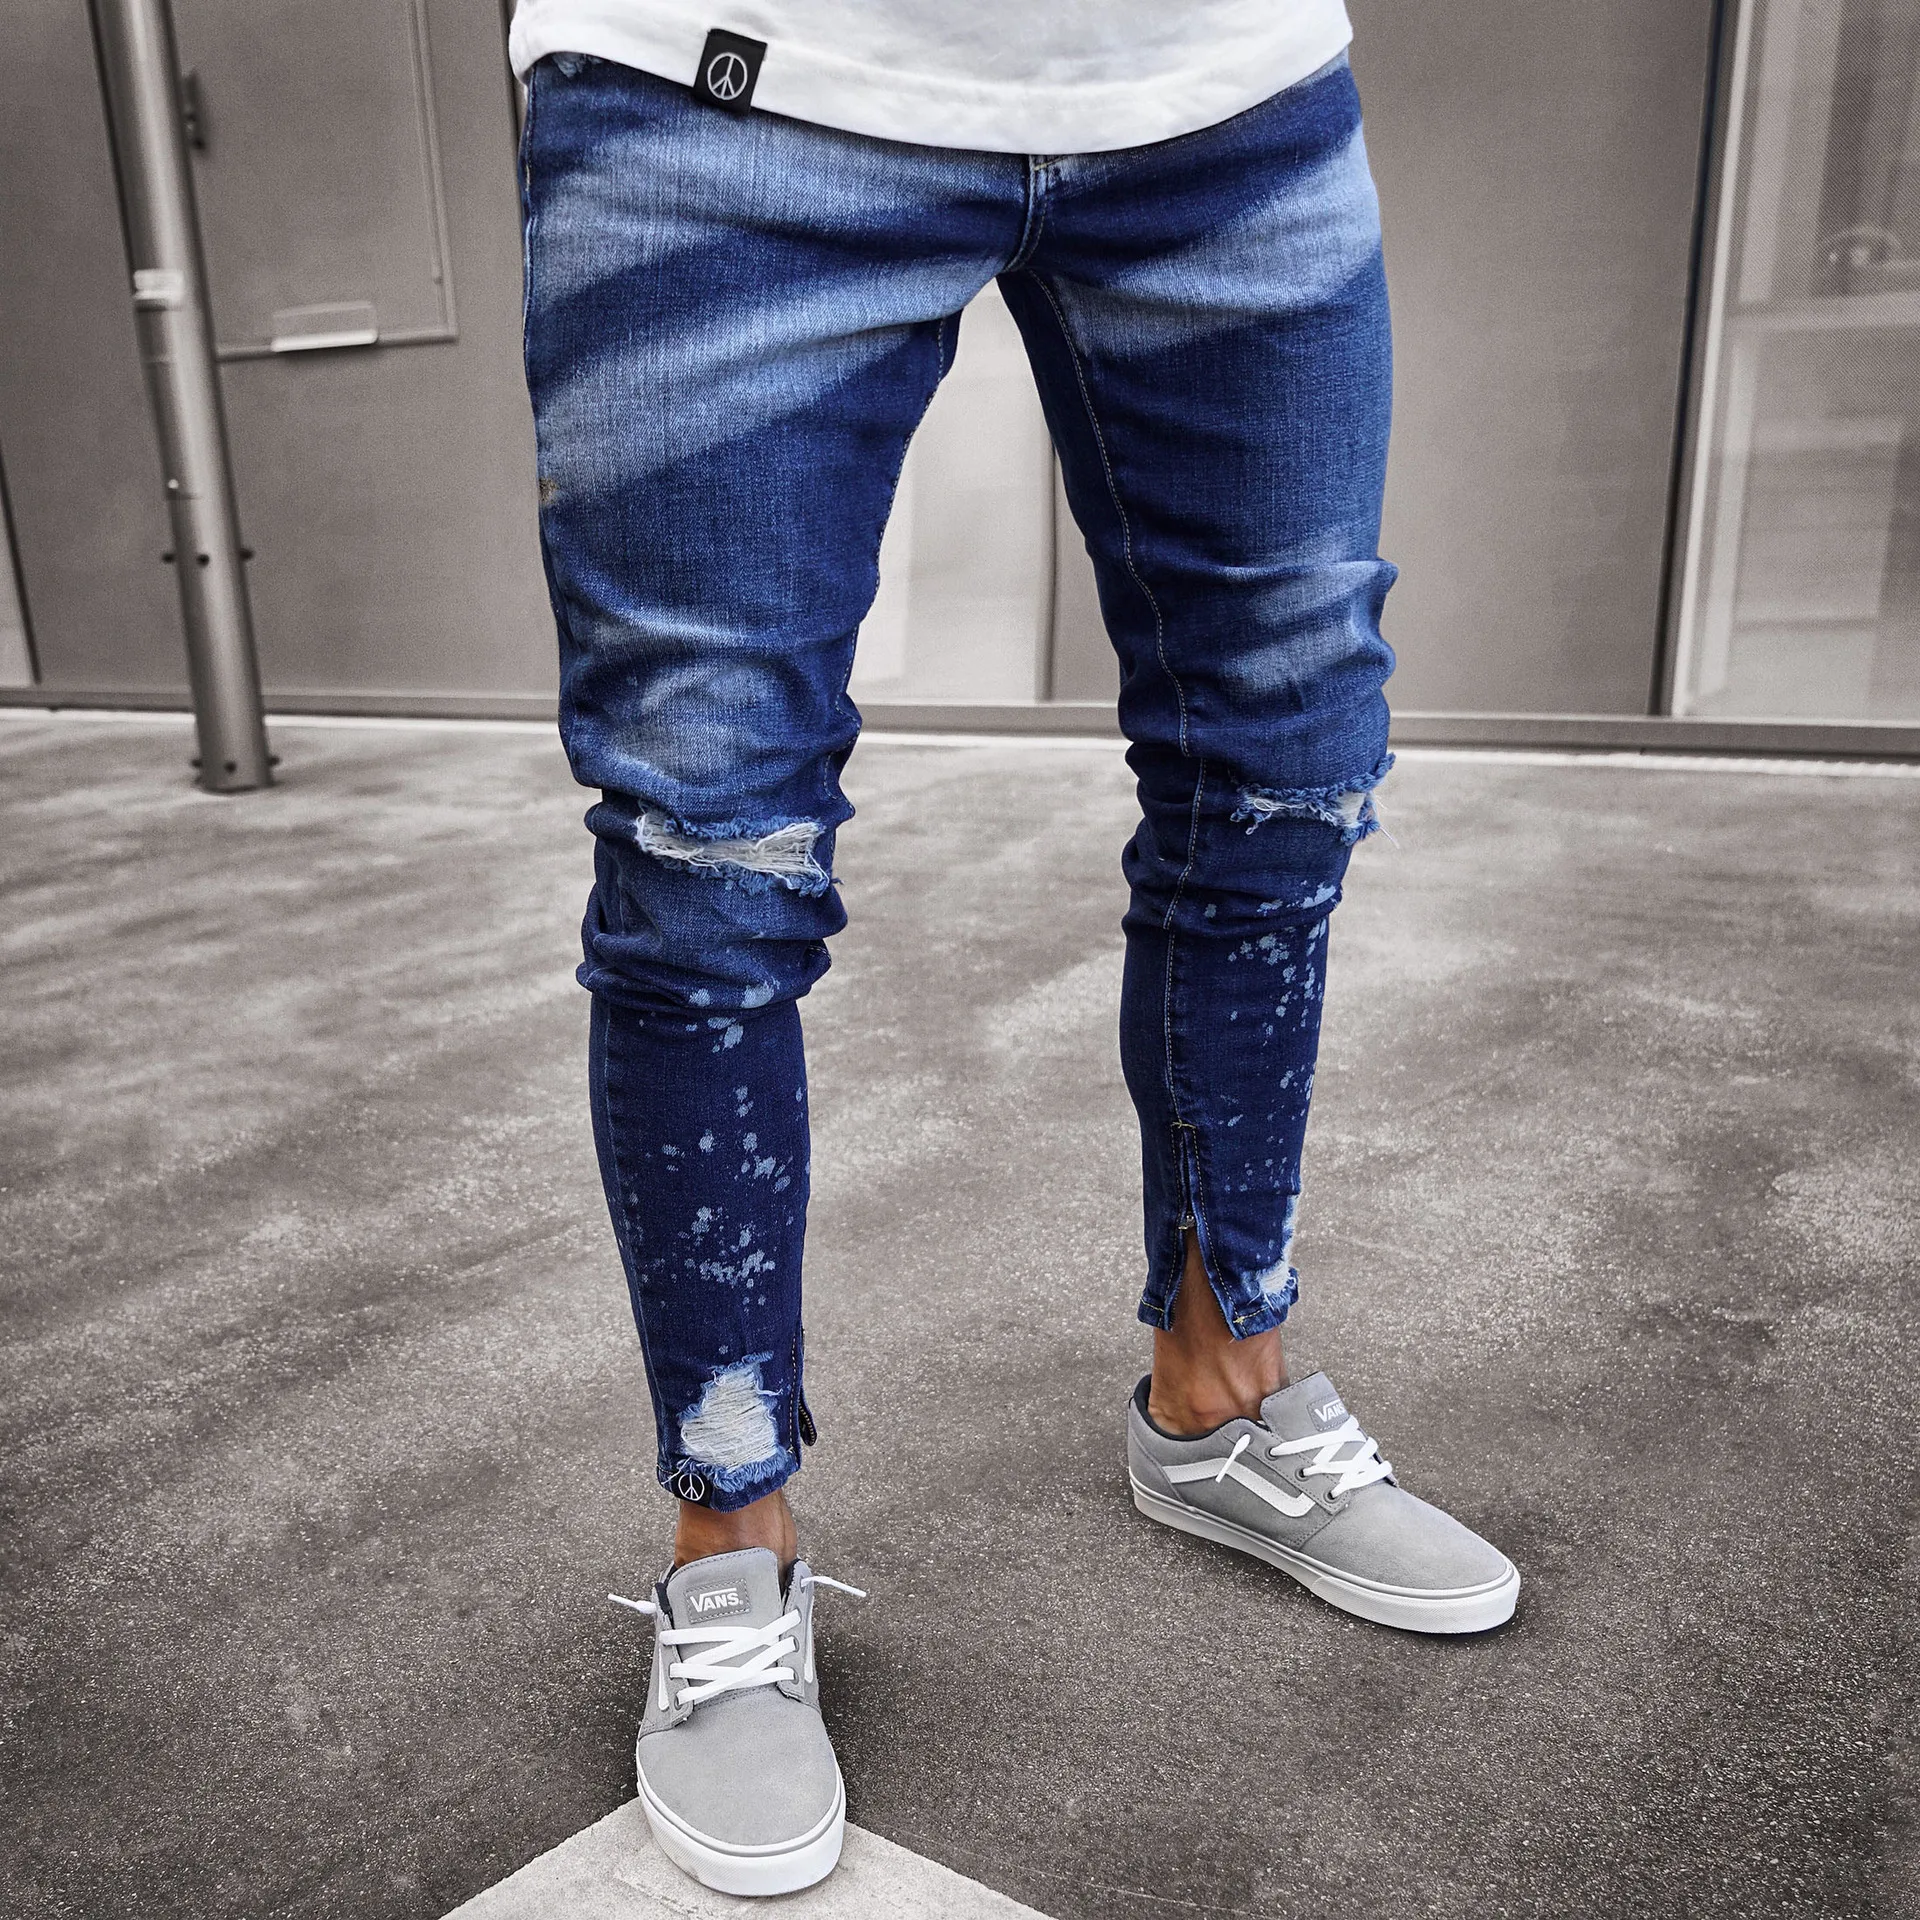 

2022 Newest Europe America Style Mens Denim Pants Printing Vintage Ripped Distressed Hole Ankle Length Pencil Pants Slim Trouser